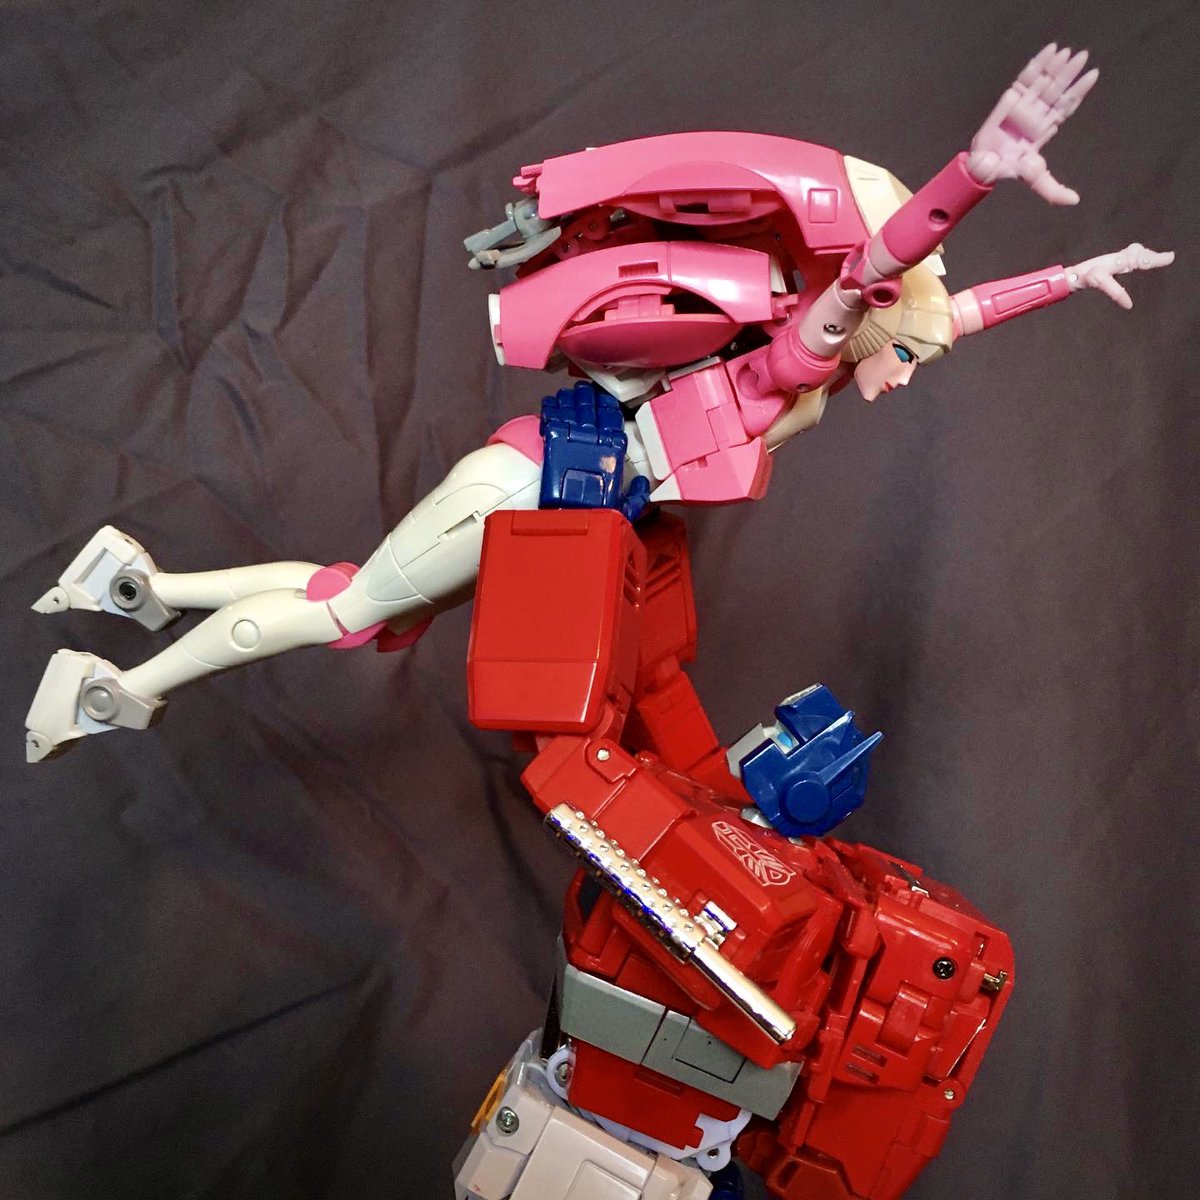 Cue “Time of My Life” 🎶🎵😄

#throwbackthursday #tbt #Transformers #toys #Autobots #OptimusPrime #Arcee #g1 #DirtyDancing #TimeOfMyLife